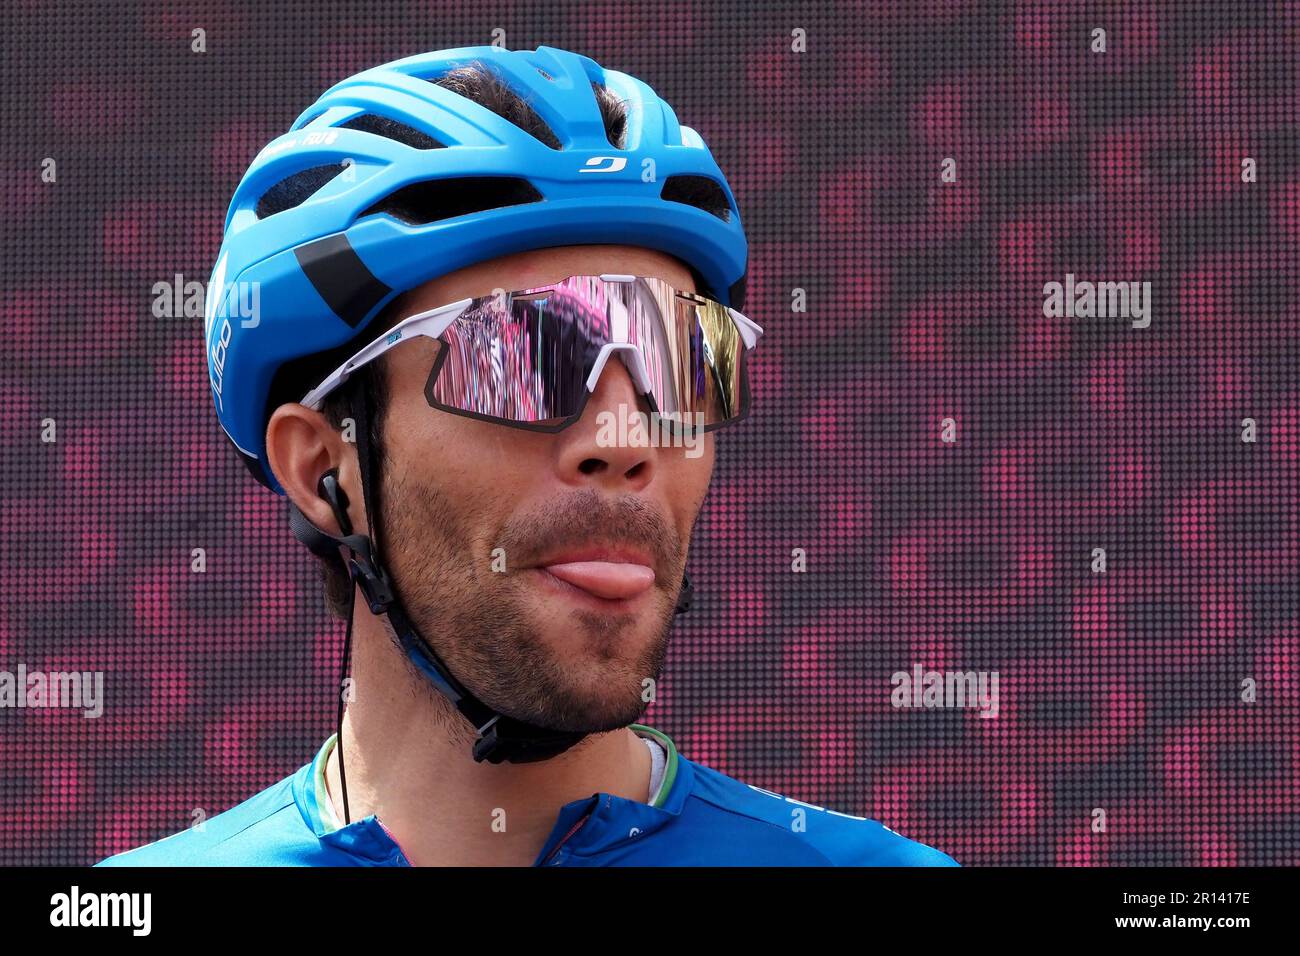 Napoli, Italy. 11th May, 2023. Thibaut Pinot è un ciclista su strada francese che corre per il team Groupama-FDJ, during the sixth stage of the Giro d'Italia with departure and arrival in Naples. Napoli, Italy, May 11, 2023. (photo by Vincenzo Izzo/Sipa USA) Credit: Sipa USA/Alamy Live News Stock Photo